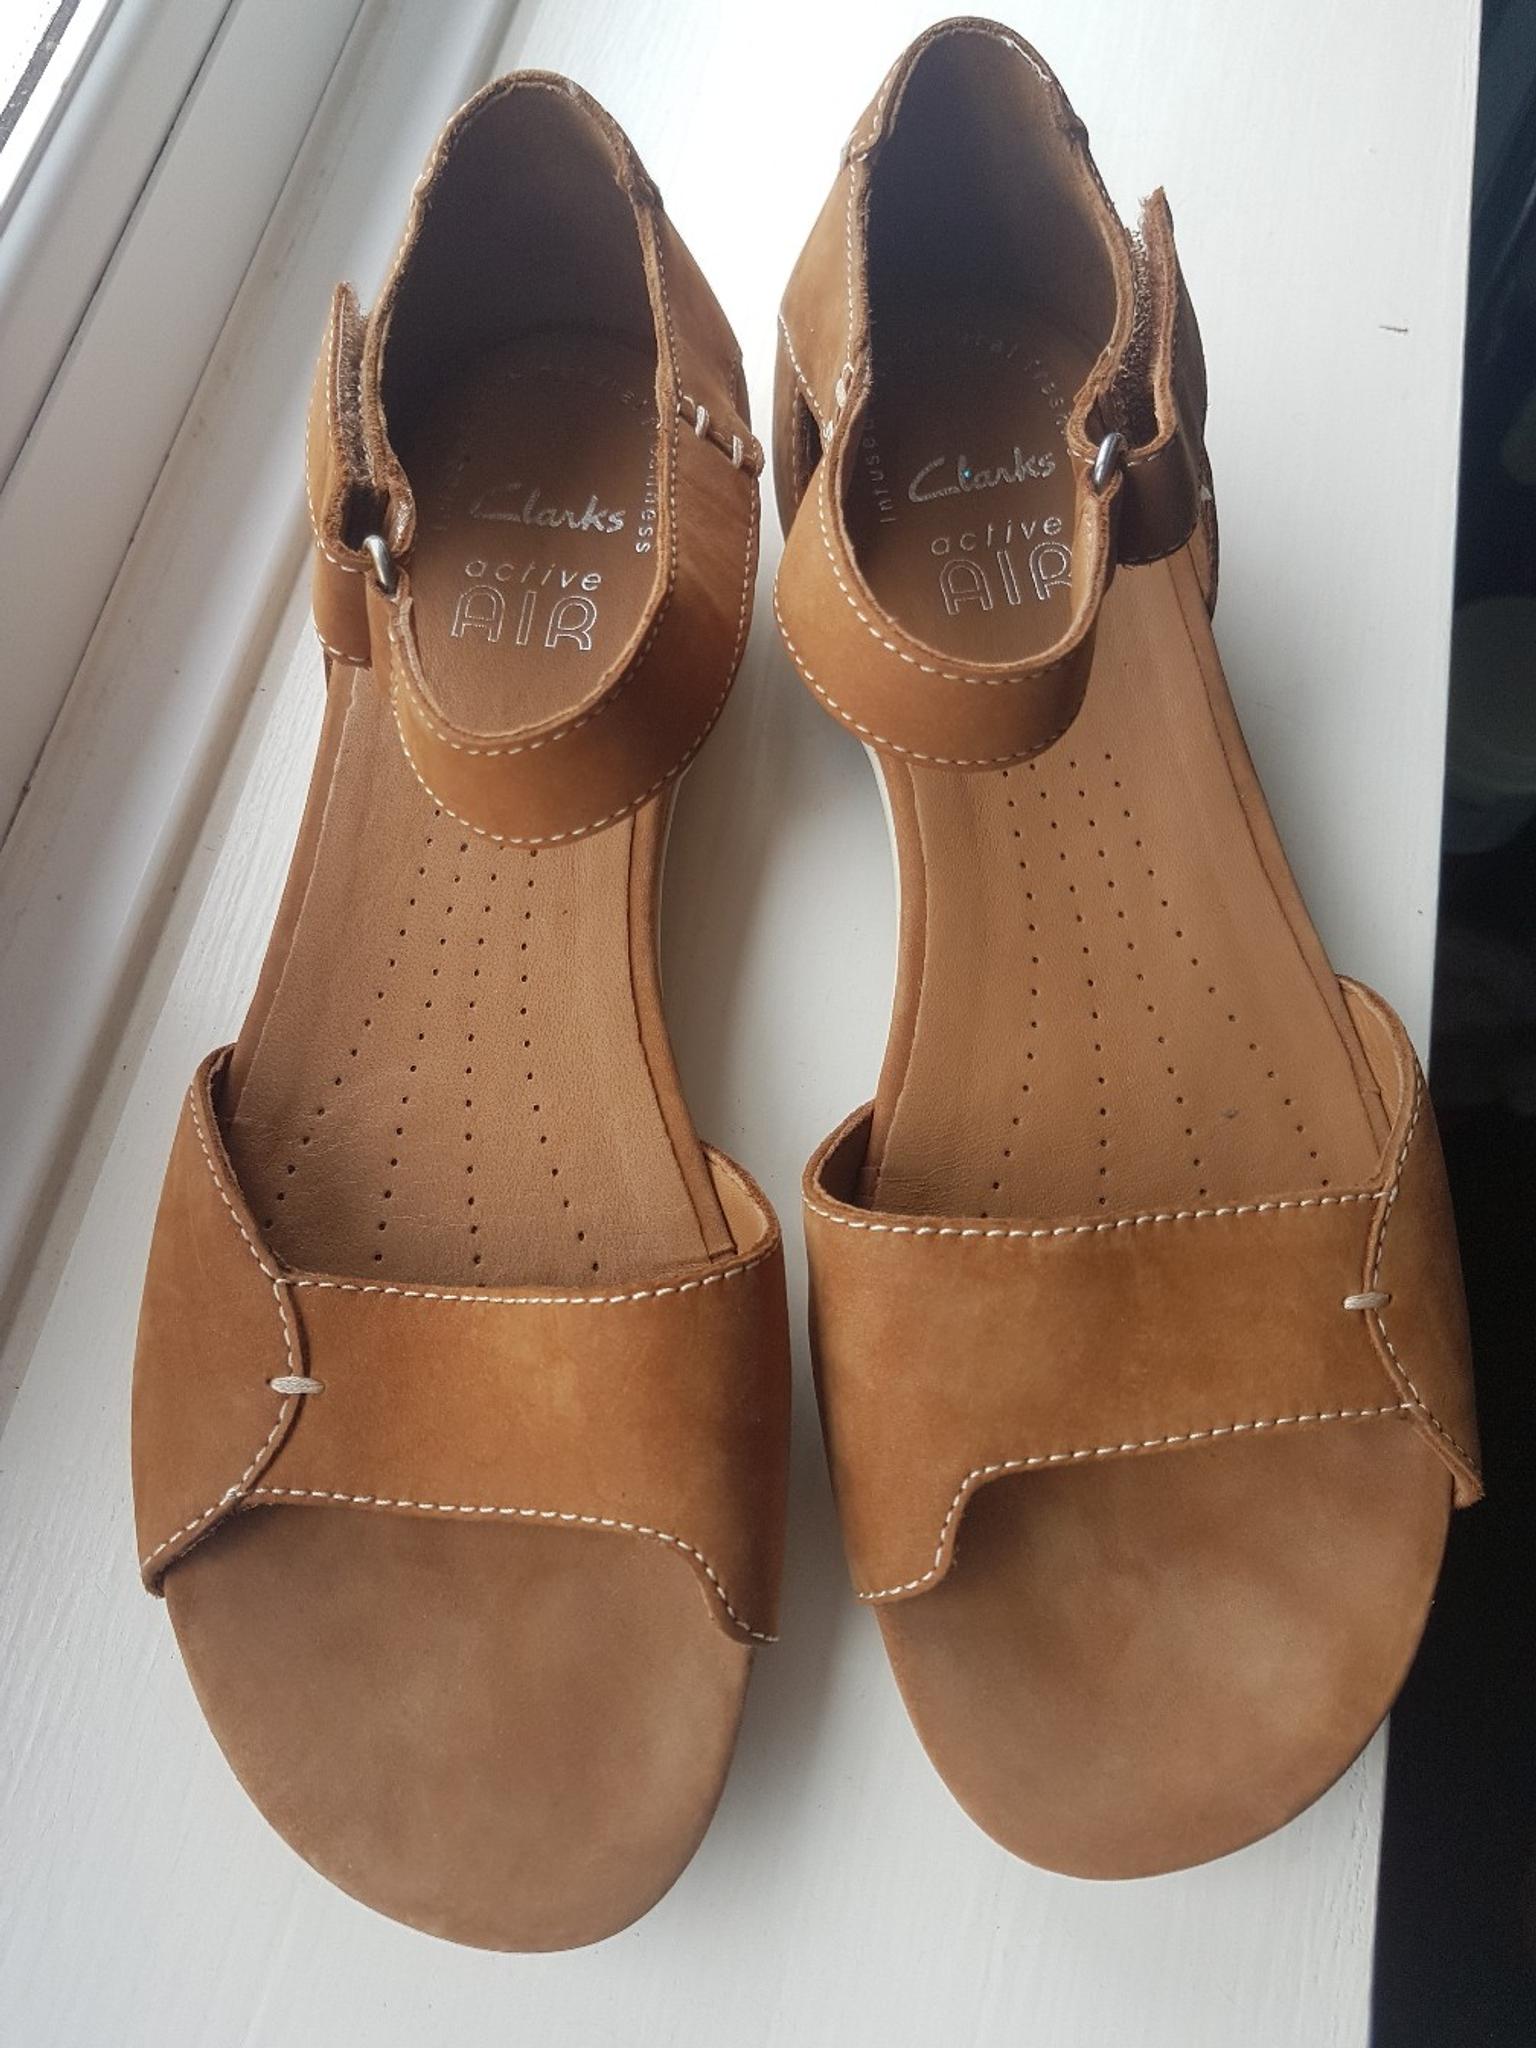 clarks womens sandals leather